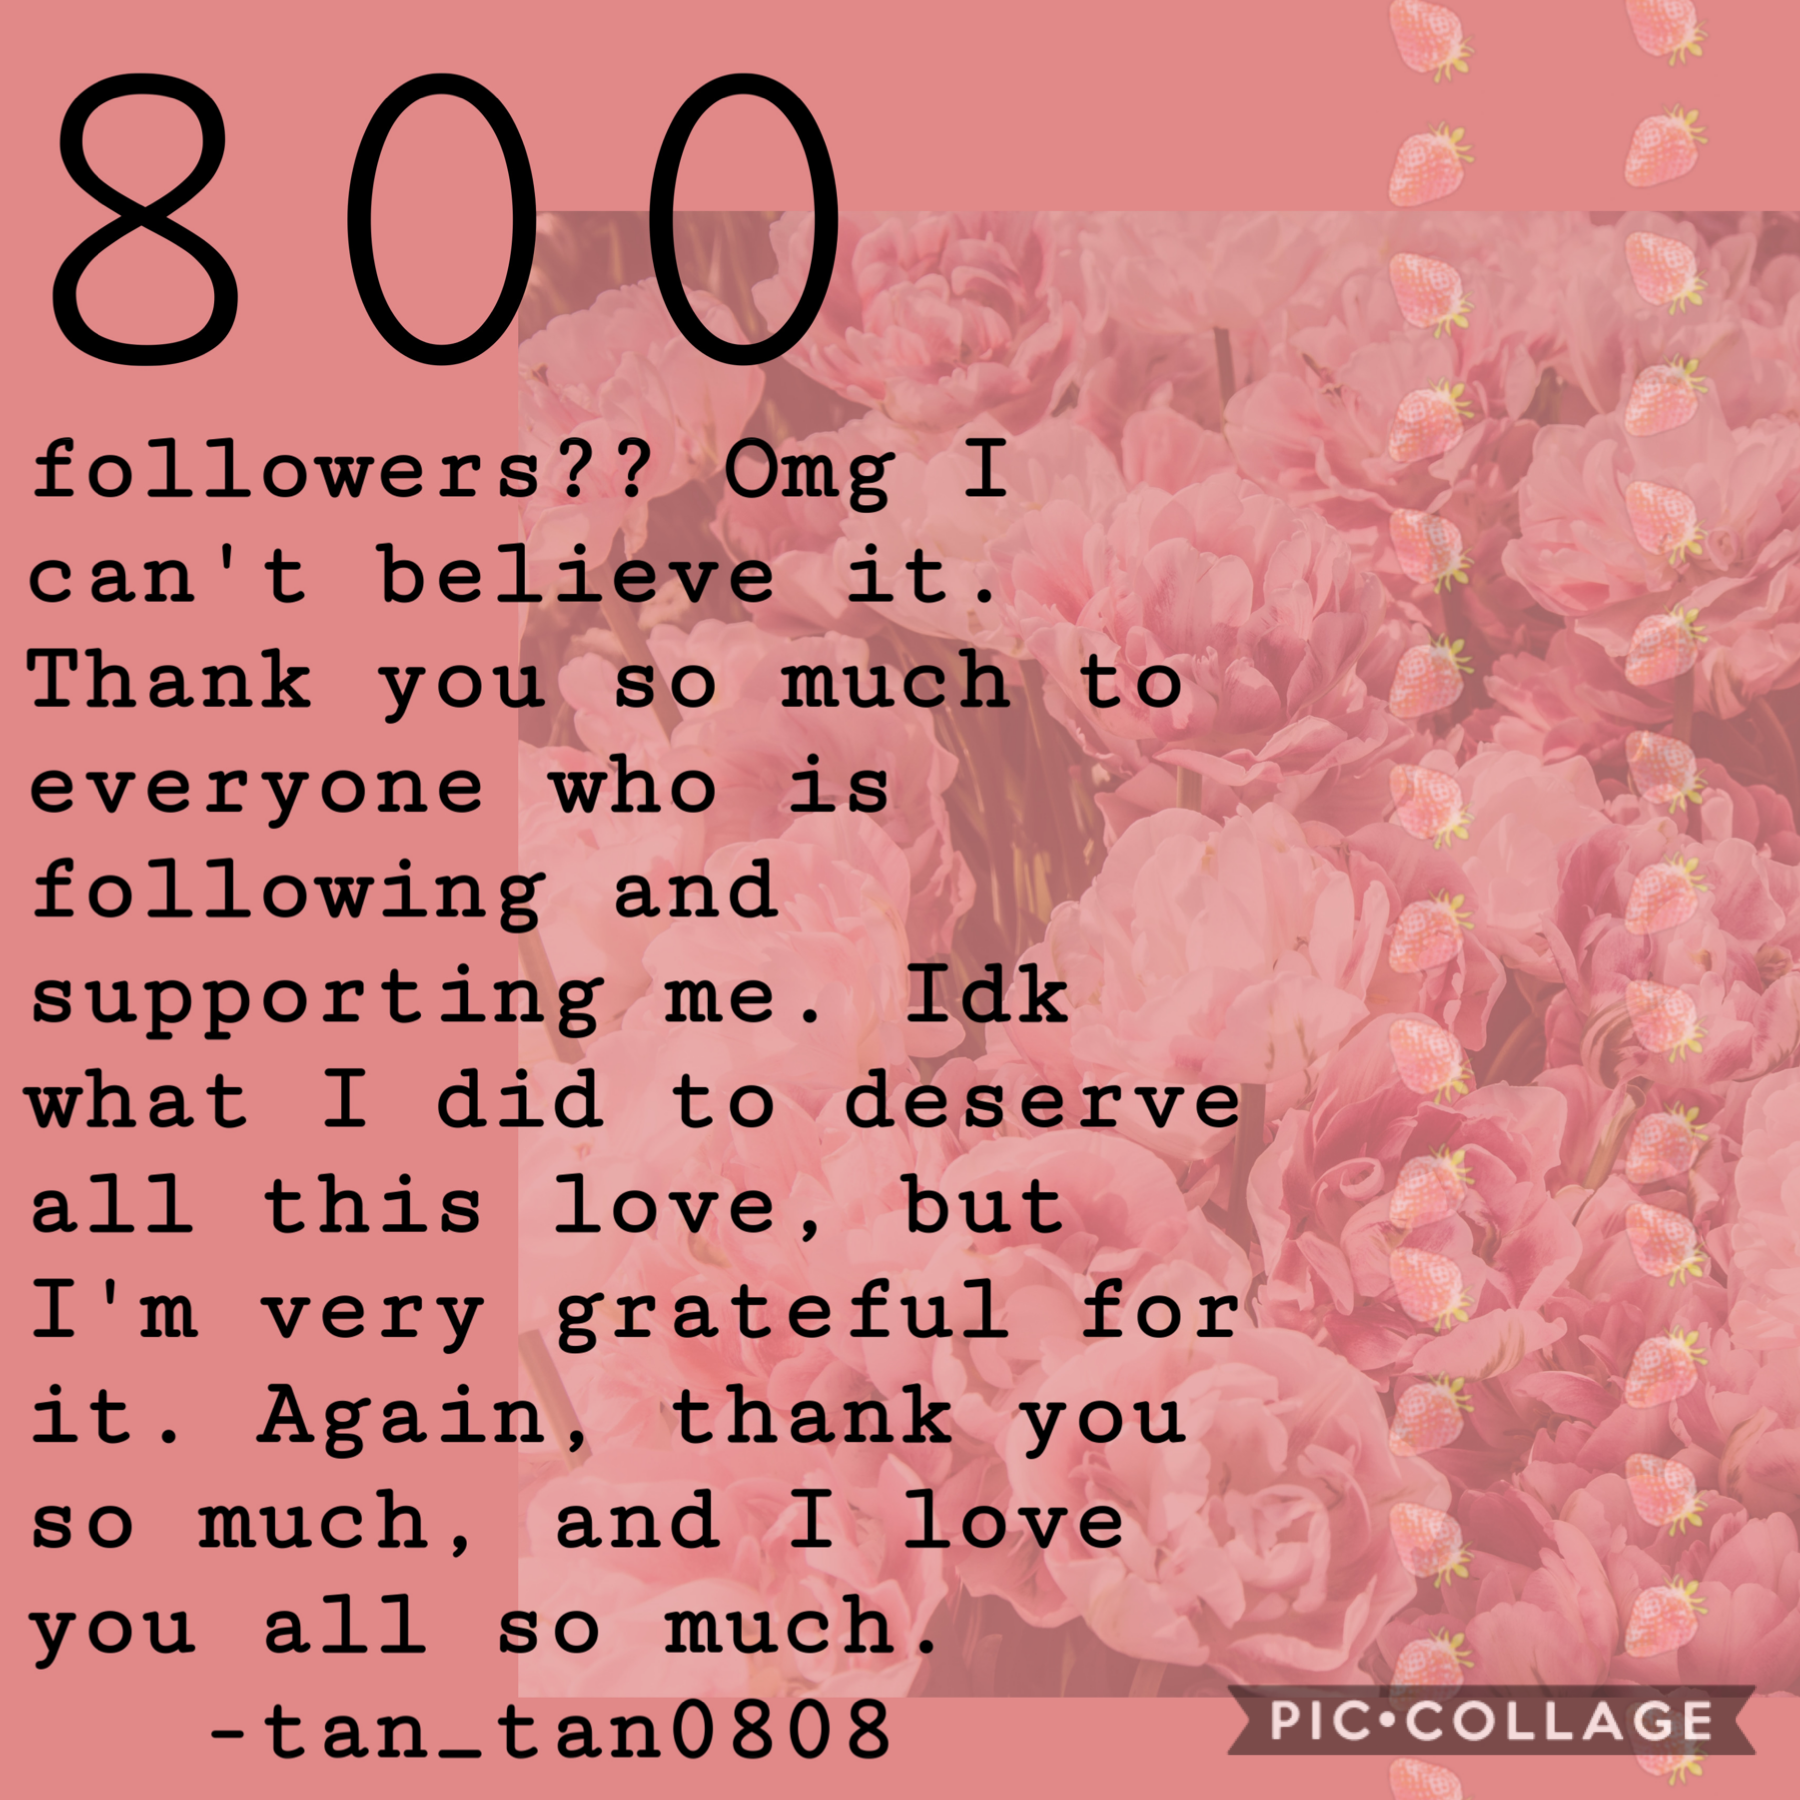 •💕•
Thank you so much everyone and love you all💕💕.